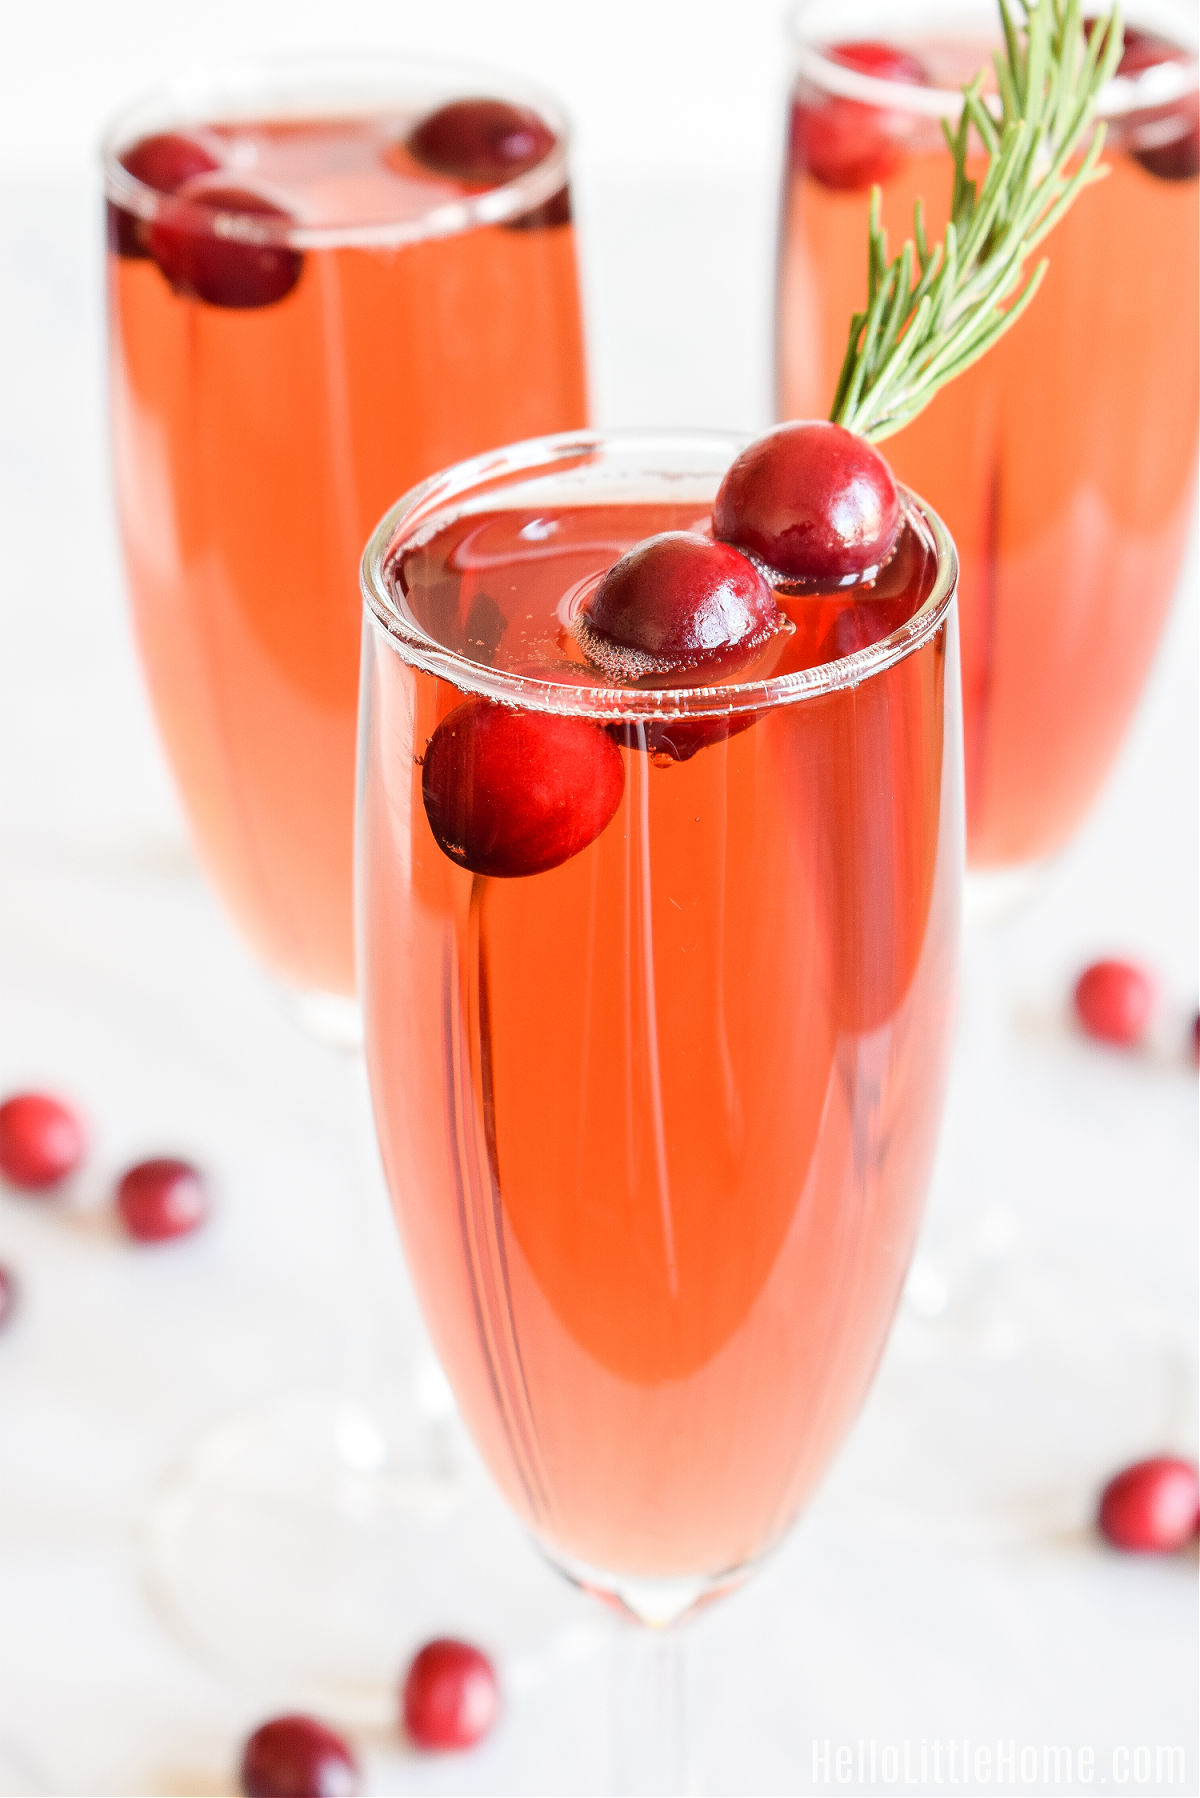 A closeup of the finished cranberry juice and champagne cocktail garnished with a sprig of rosemary.